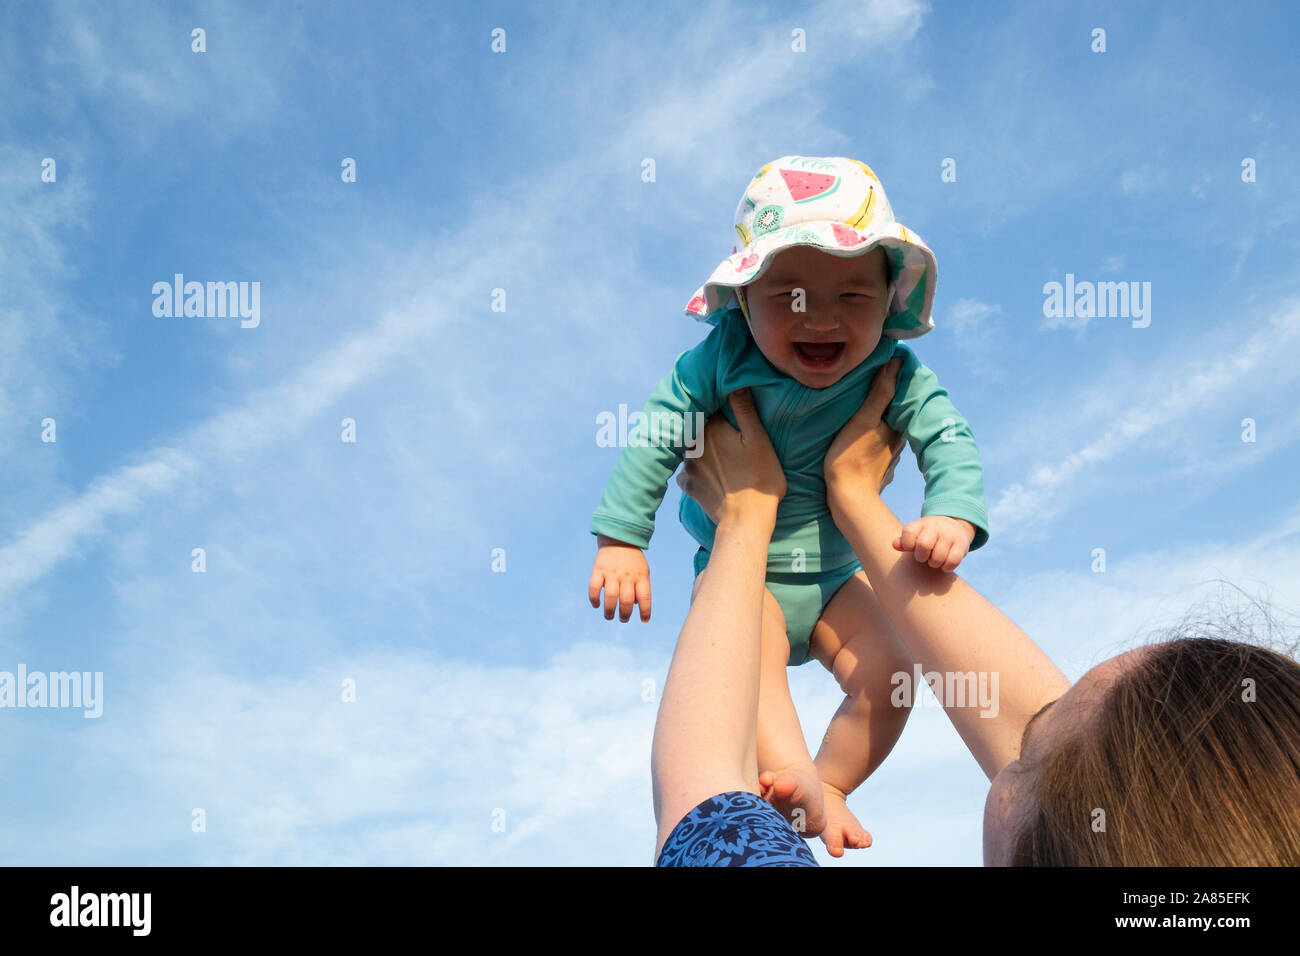 Mother holding baby girl up in air with both arms against a blue sky Stock Photo